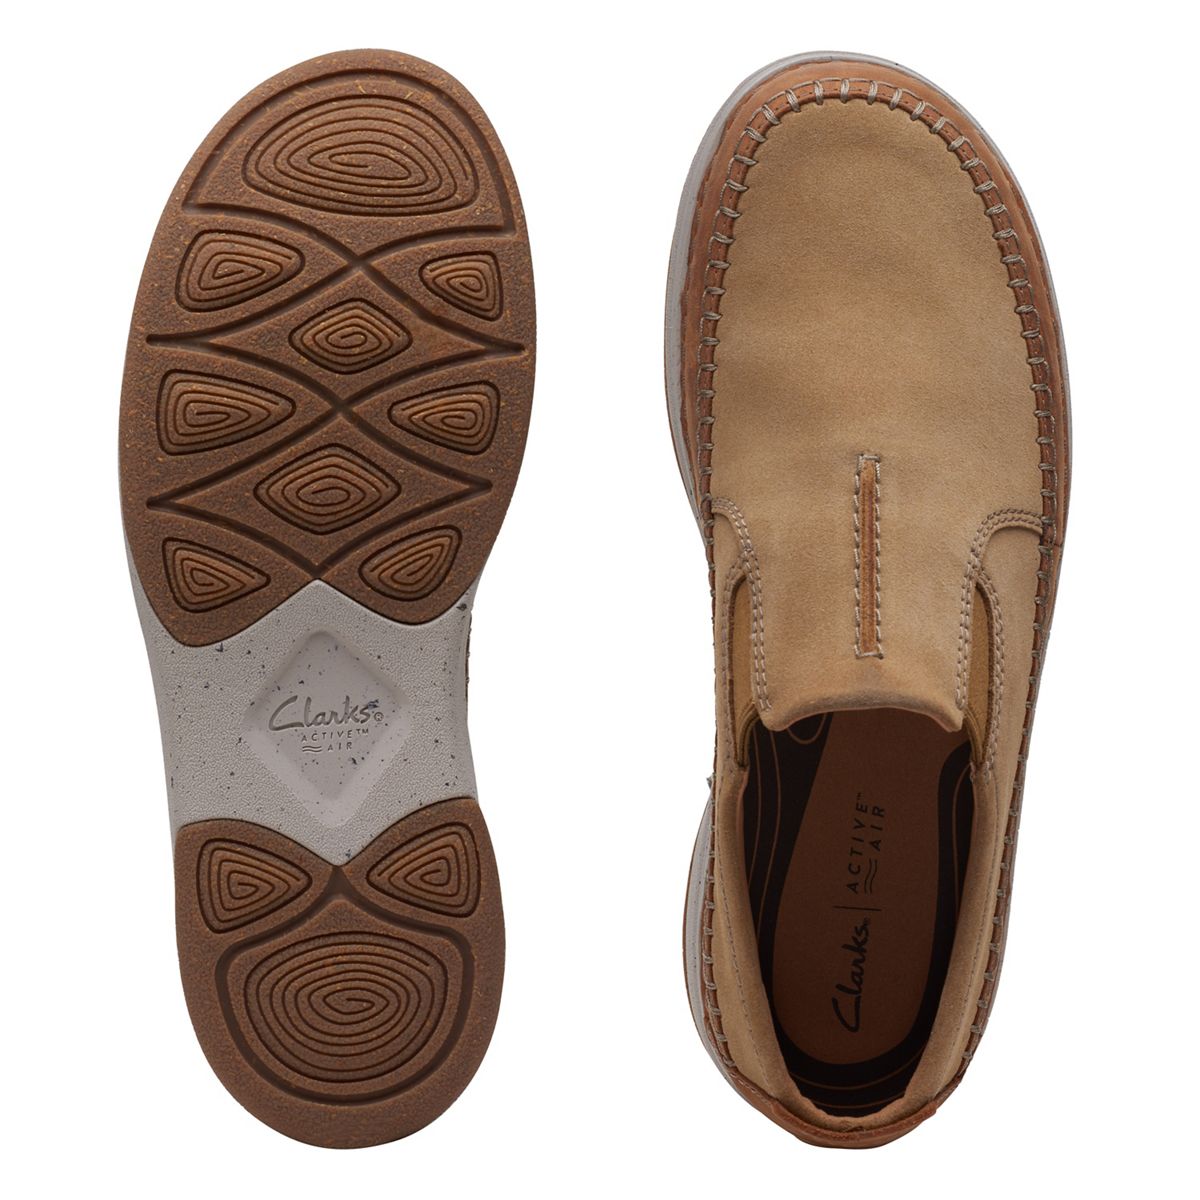 spids tempo Seaside Nature 5 Walk - Clarks Canada Official Site | Clarks Shoes